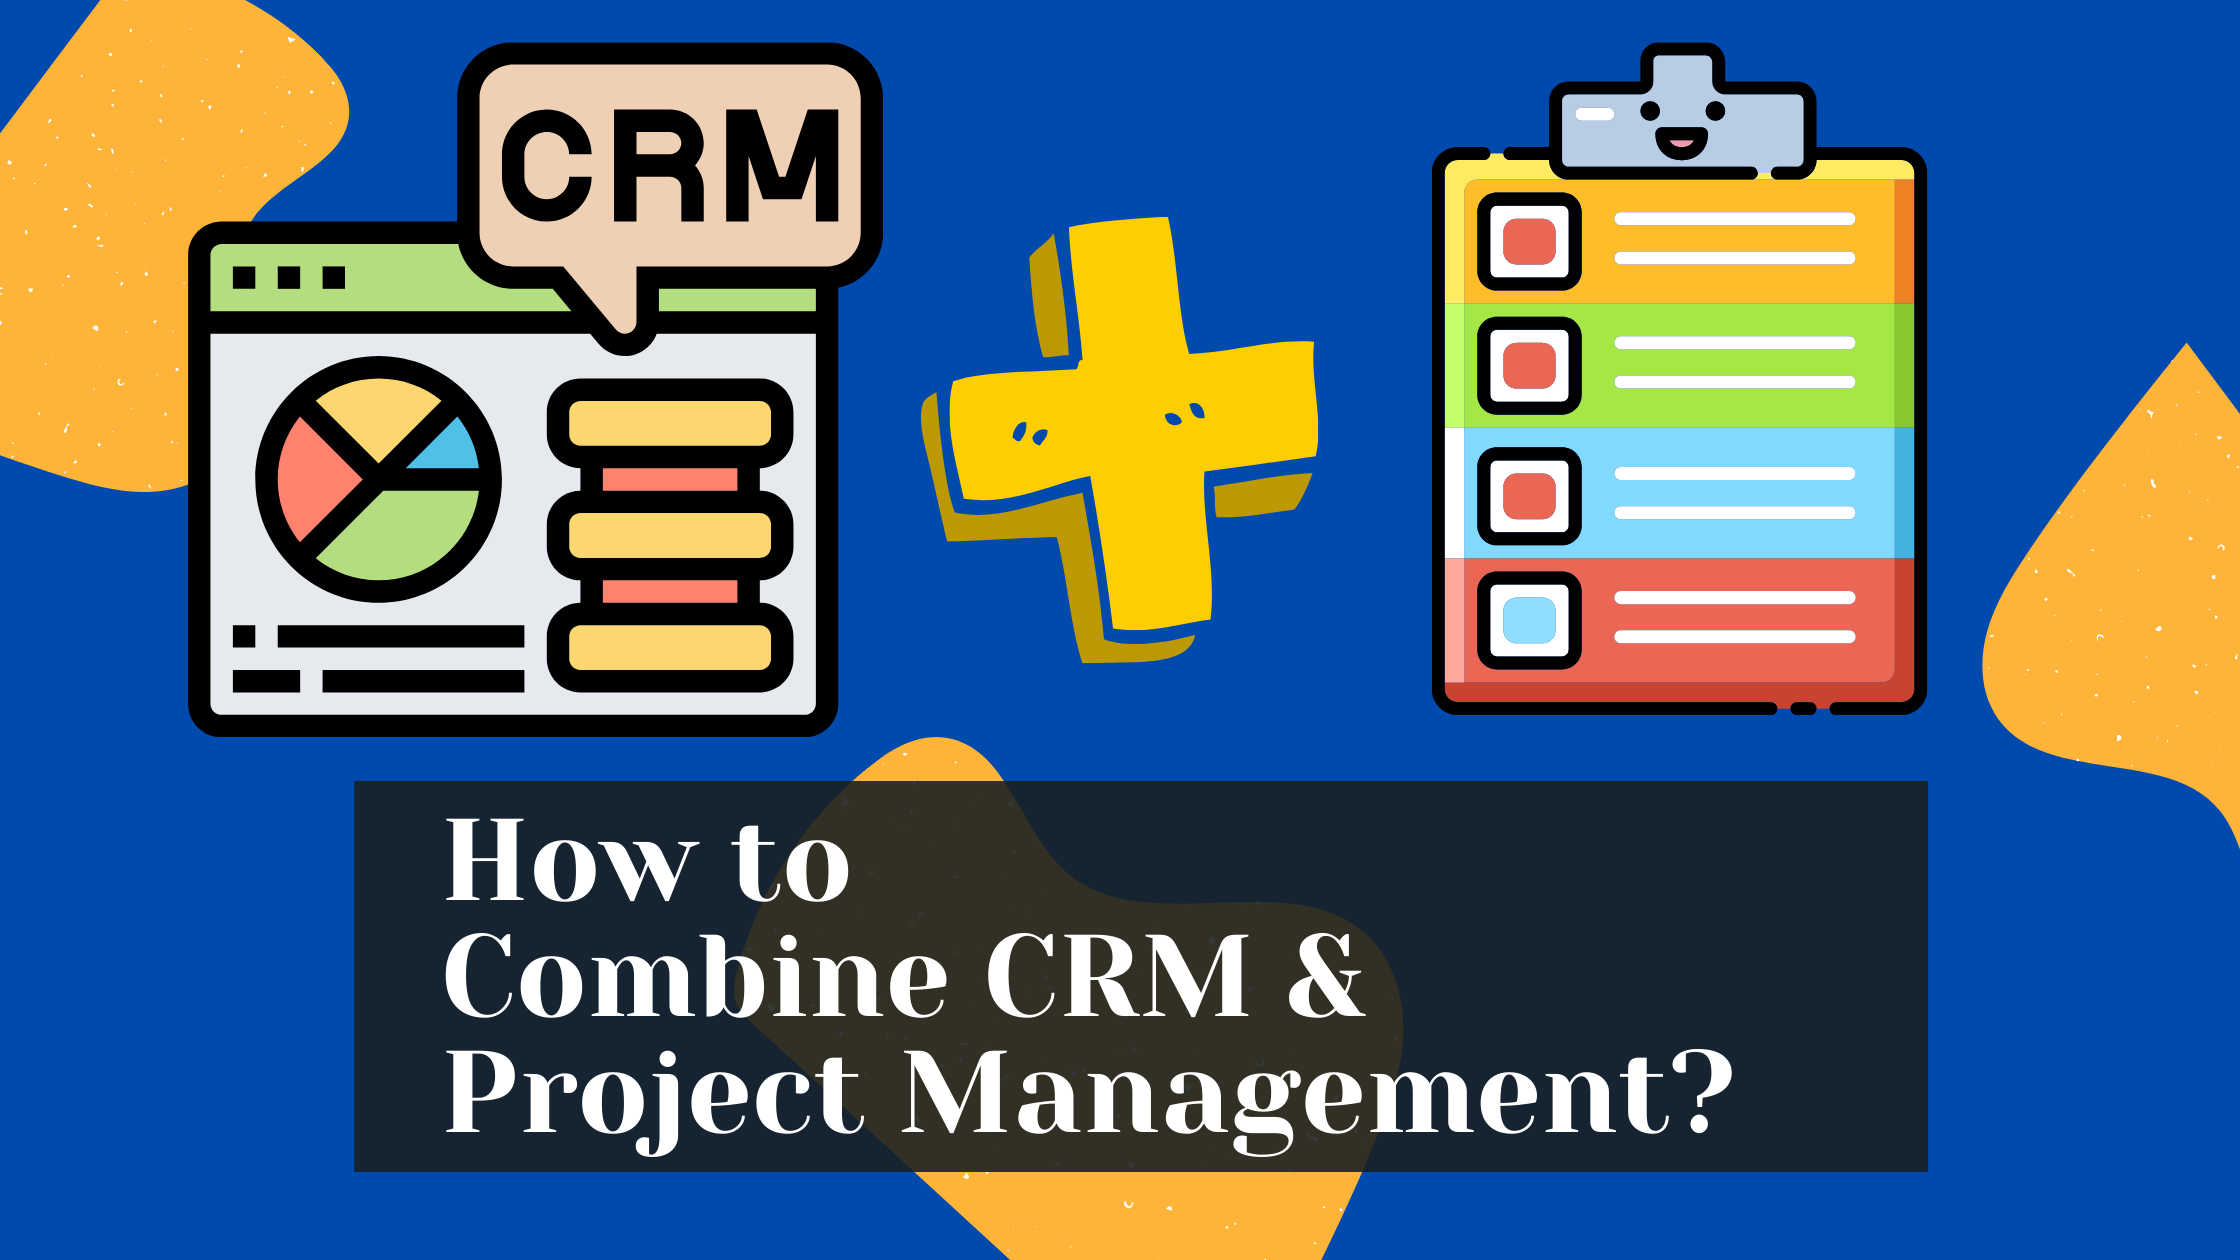 How Can You Combine CRM and Project Management?